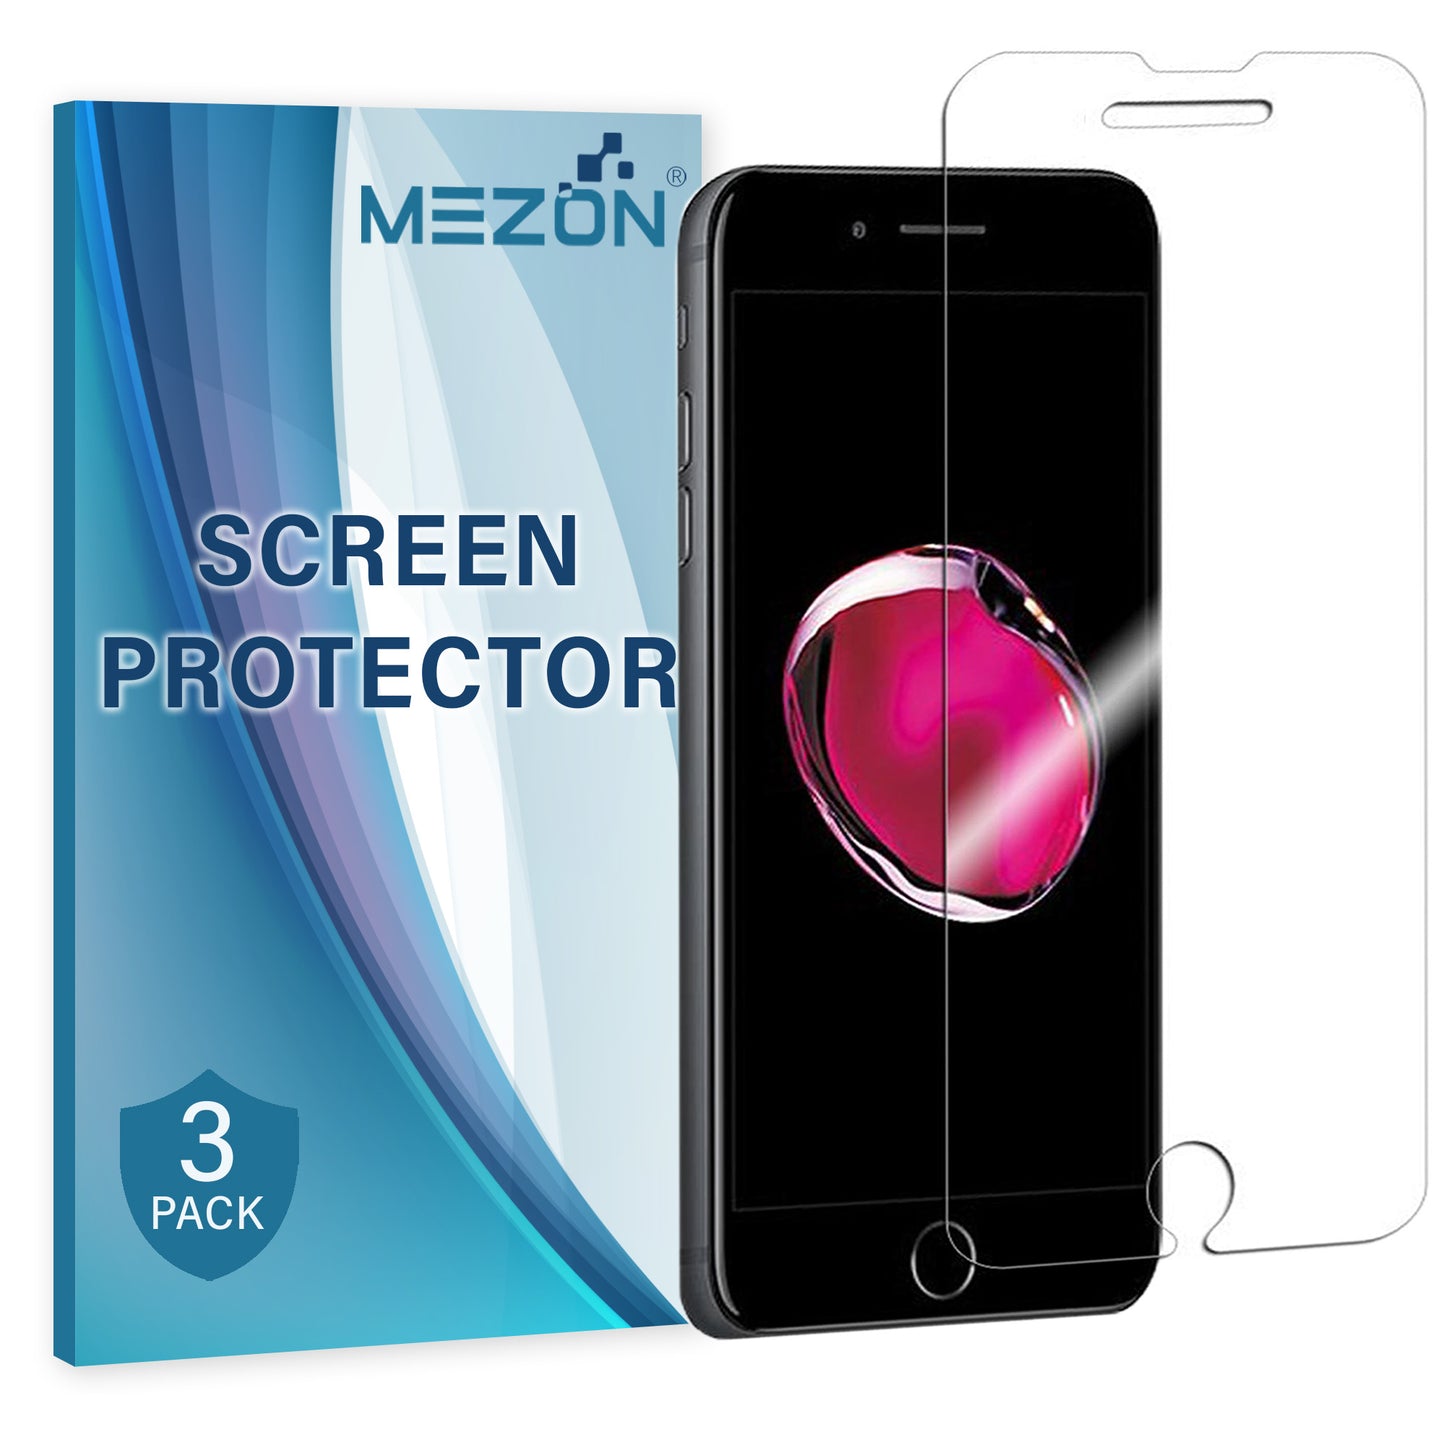 [3 Pack] MEZON Apple iPhone 8 (4.7") Ultra Clear Screen Protector Case Friendly Film (iPhone 8, Clear)